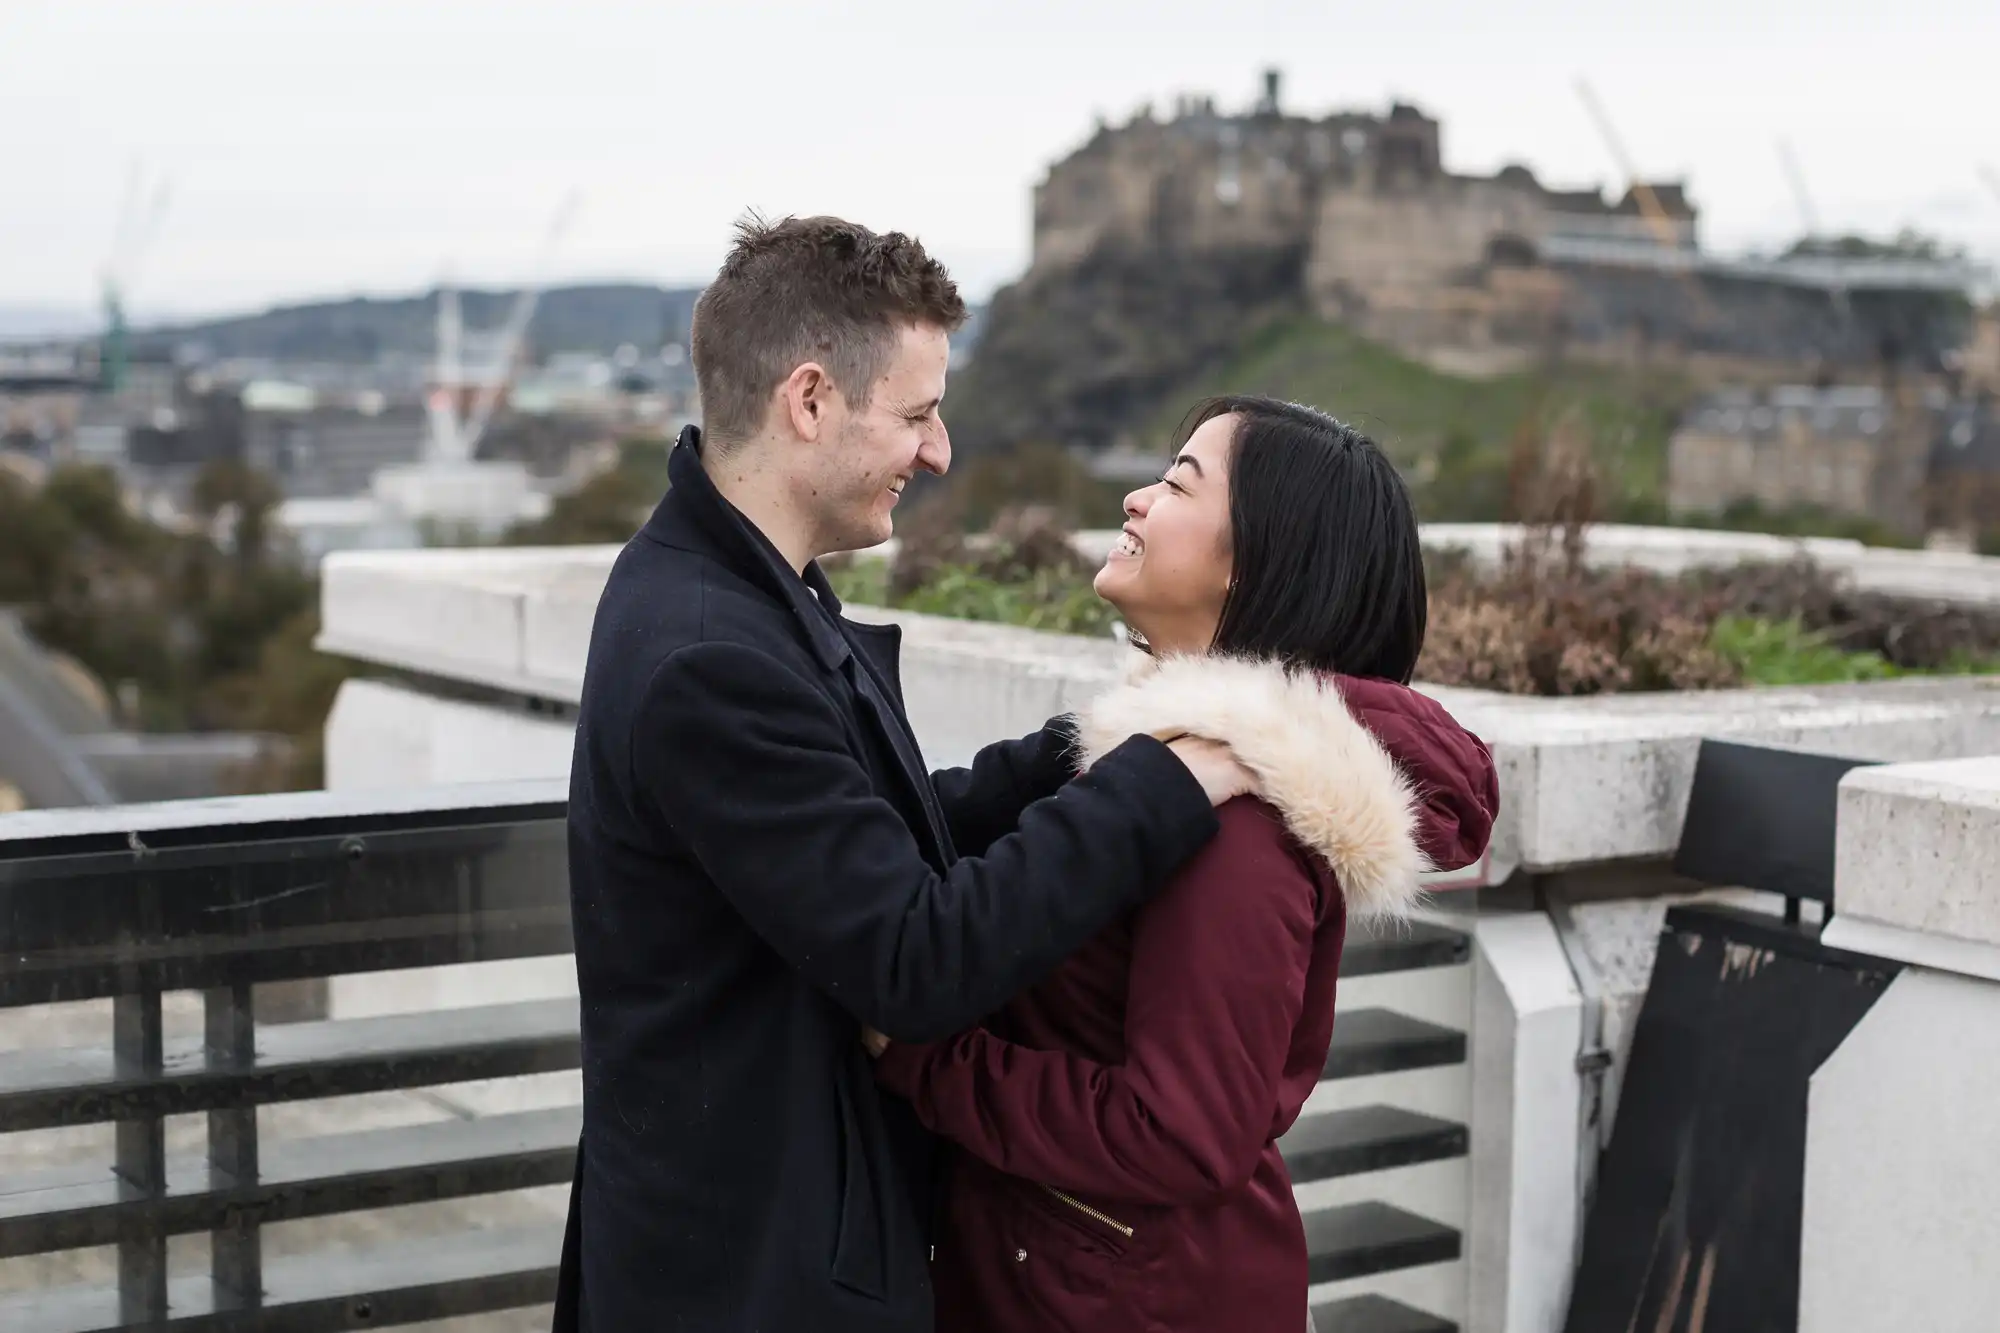 A couple affectionately looking at each other with edinburgh castle in the background.